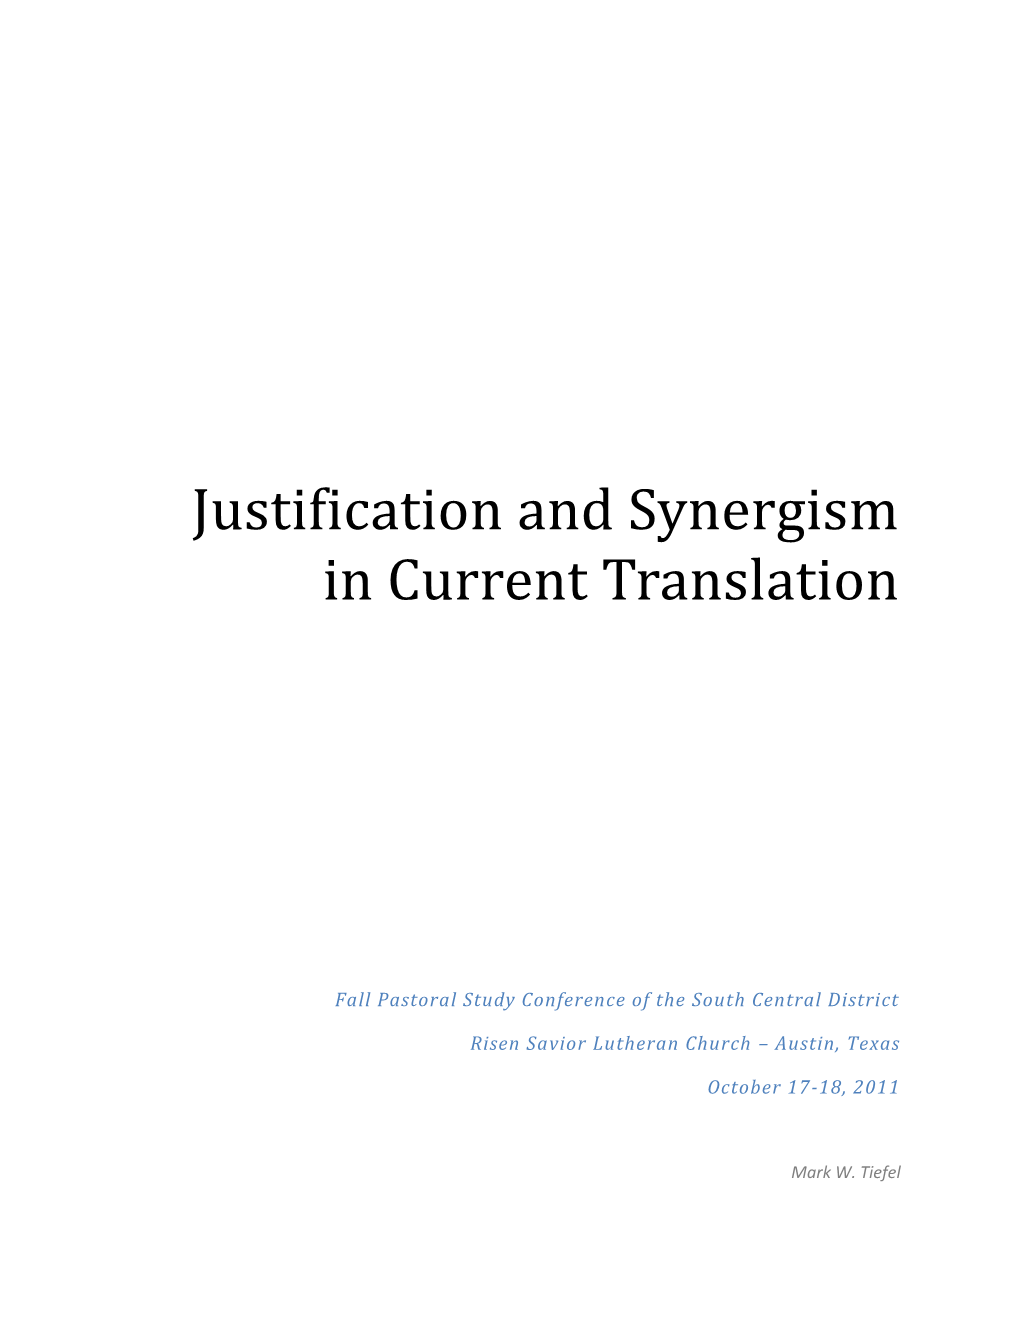 Justification and Synergism in Current Translation